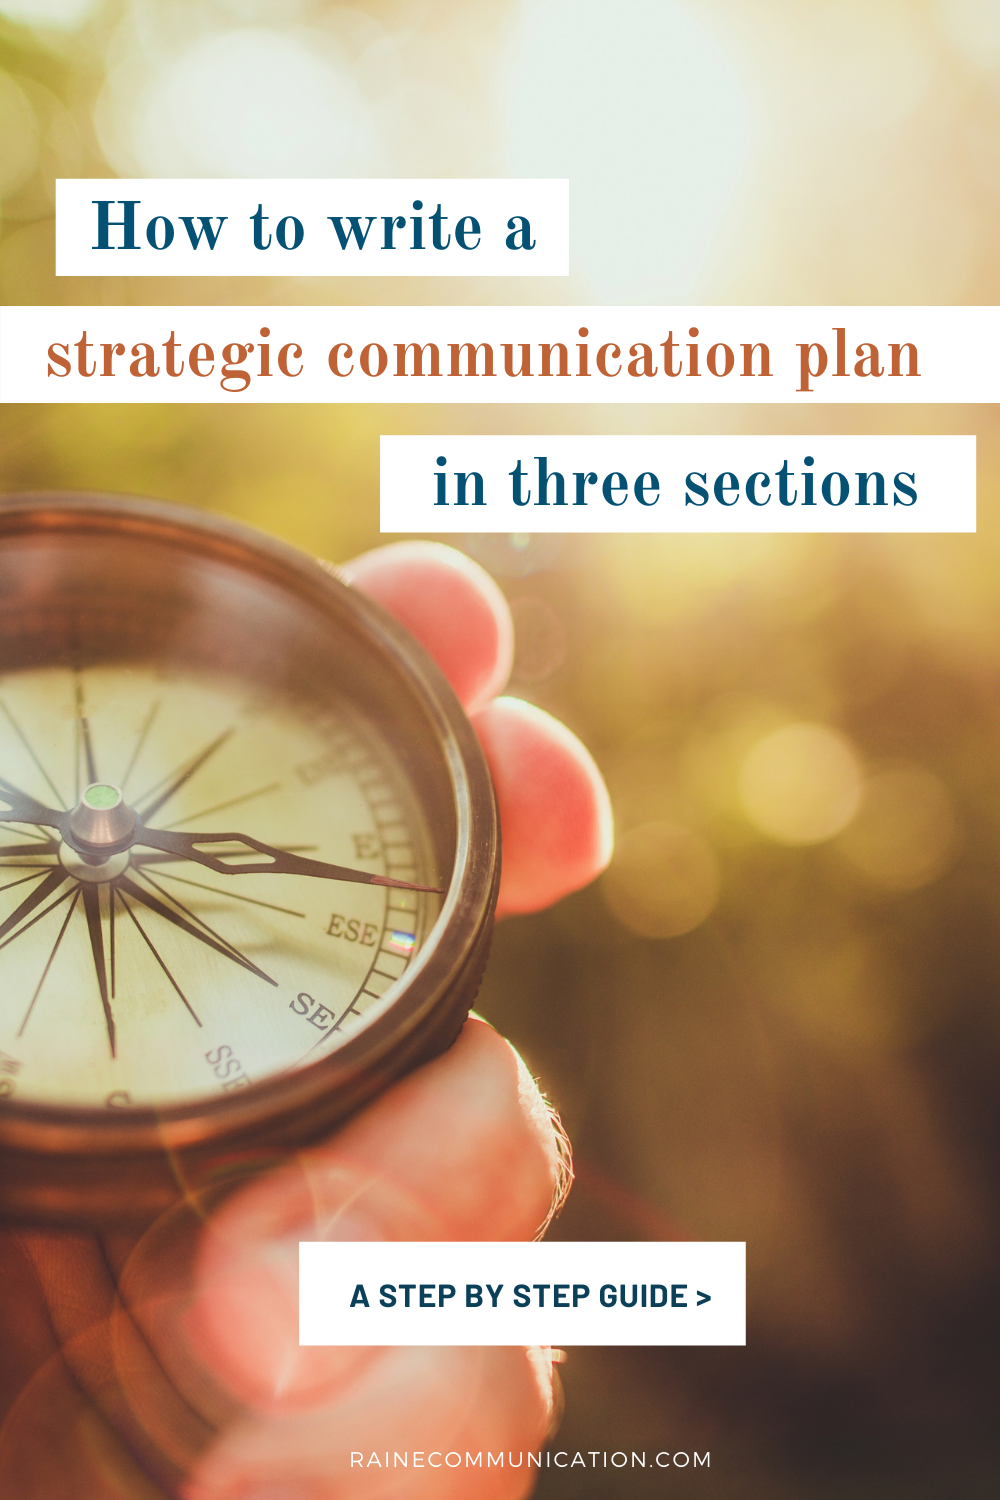 How to write a strategic communication plan in three sections, step-by-step